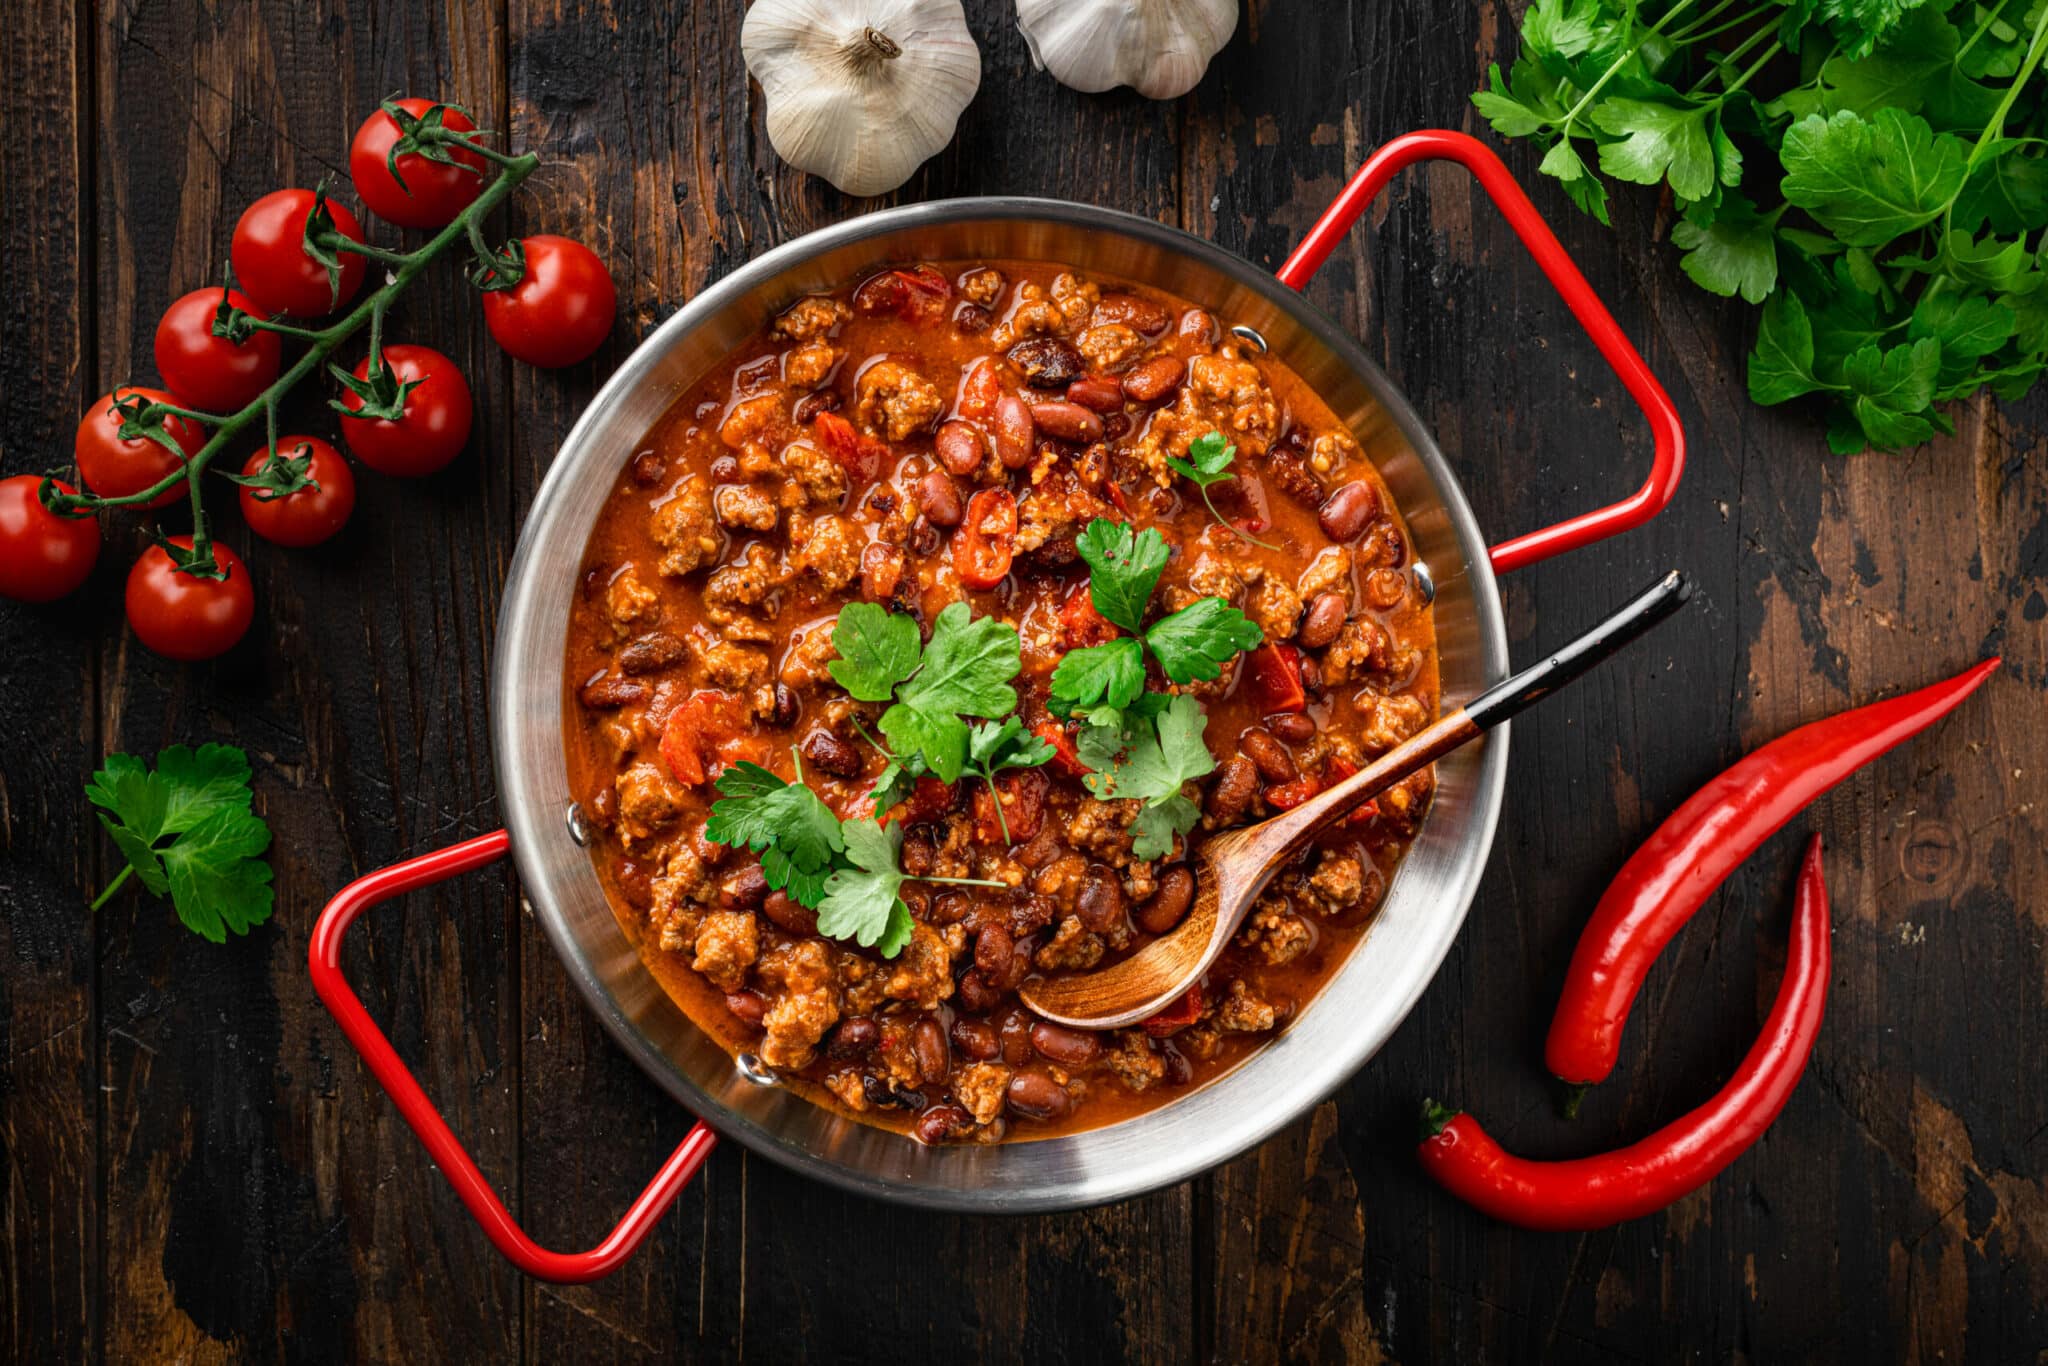 How Long Does Chili Take To Cook